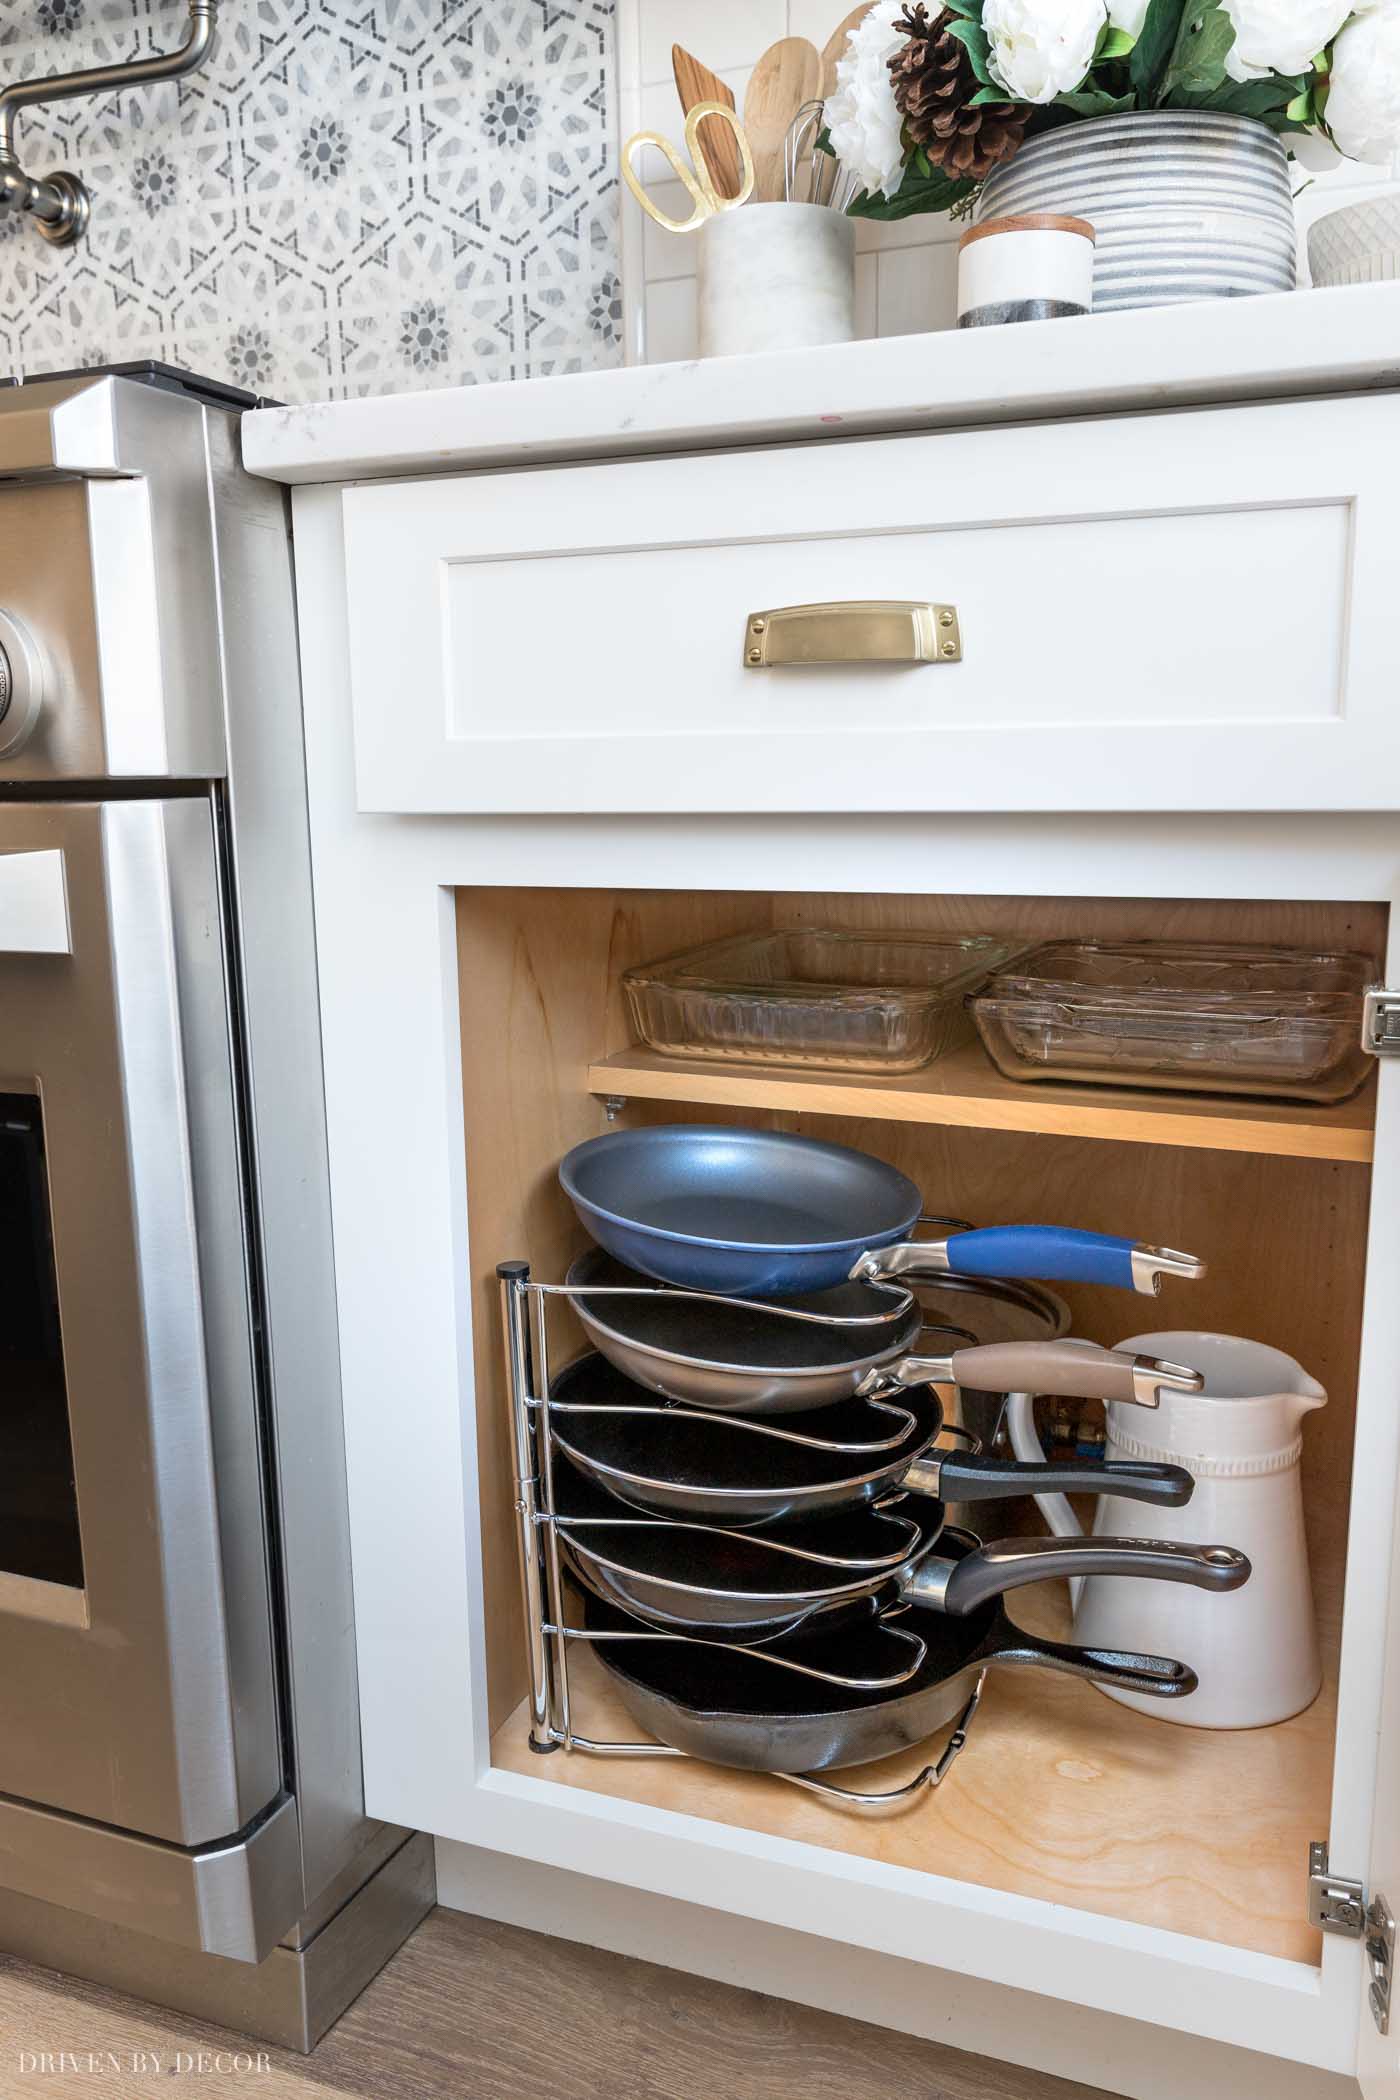 A smart way to store pans in your kitchen cabinets!